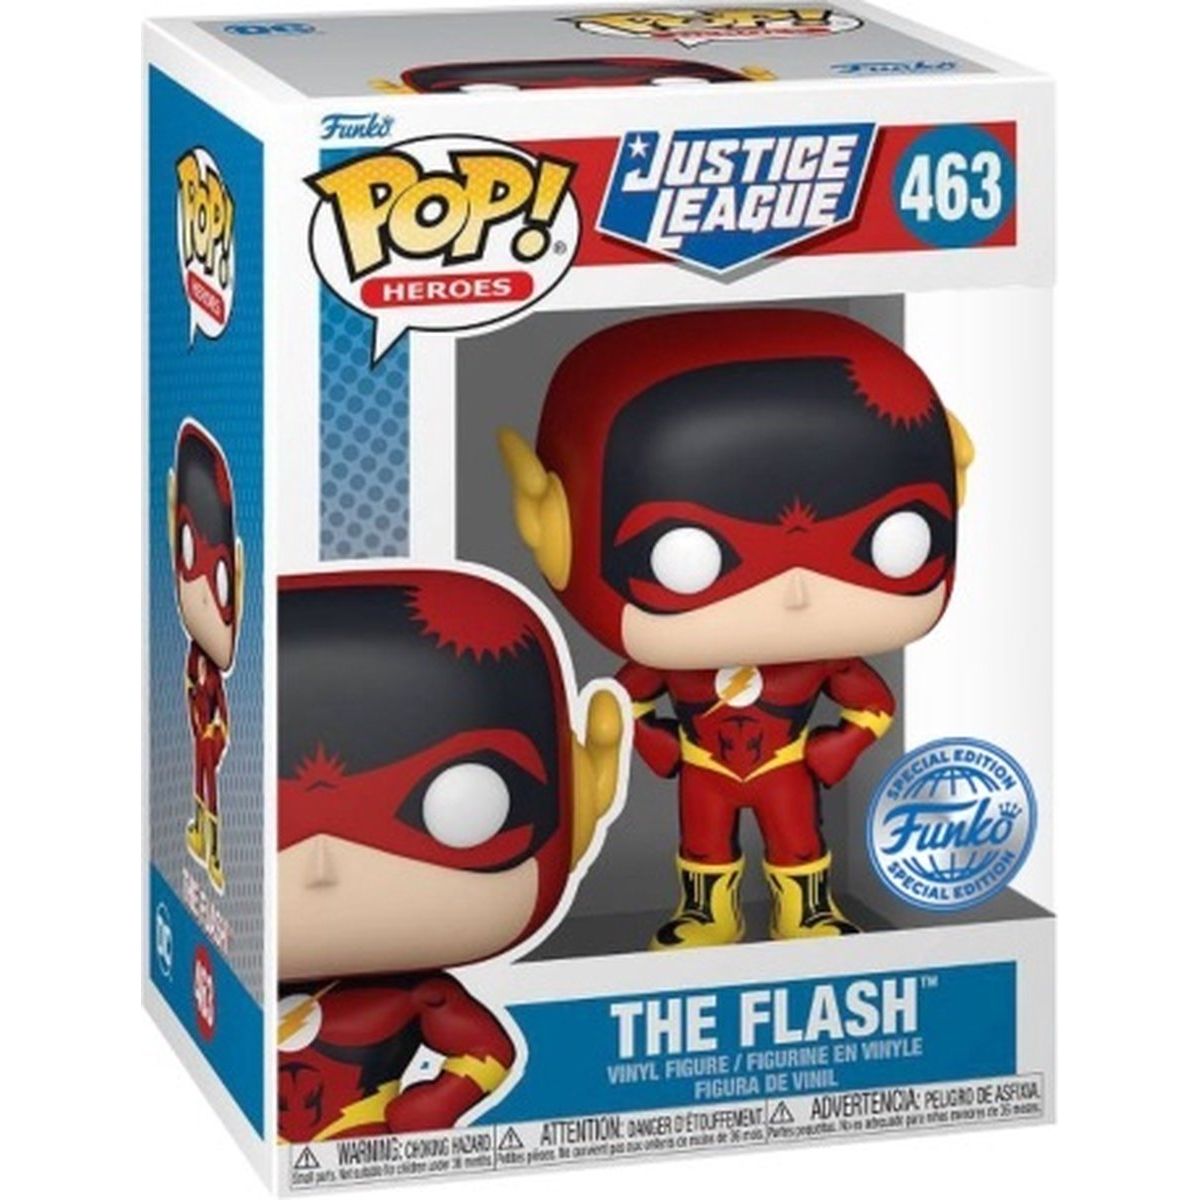 Funko Pop! Heroes - Justice League Comic - The Flash Special Edition